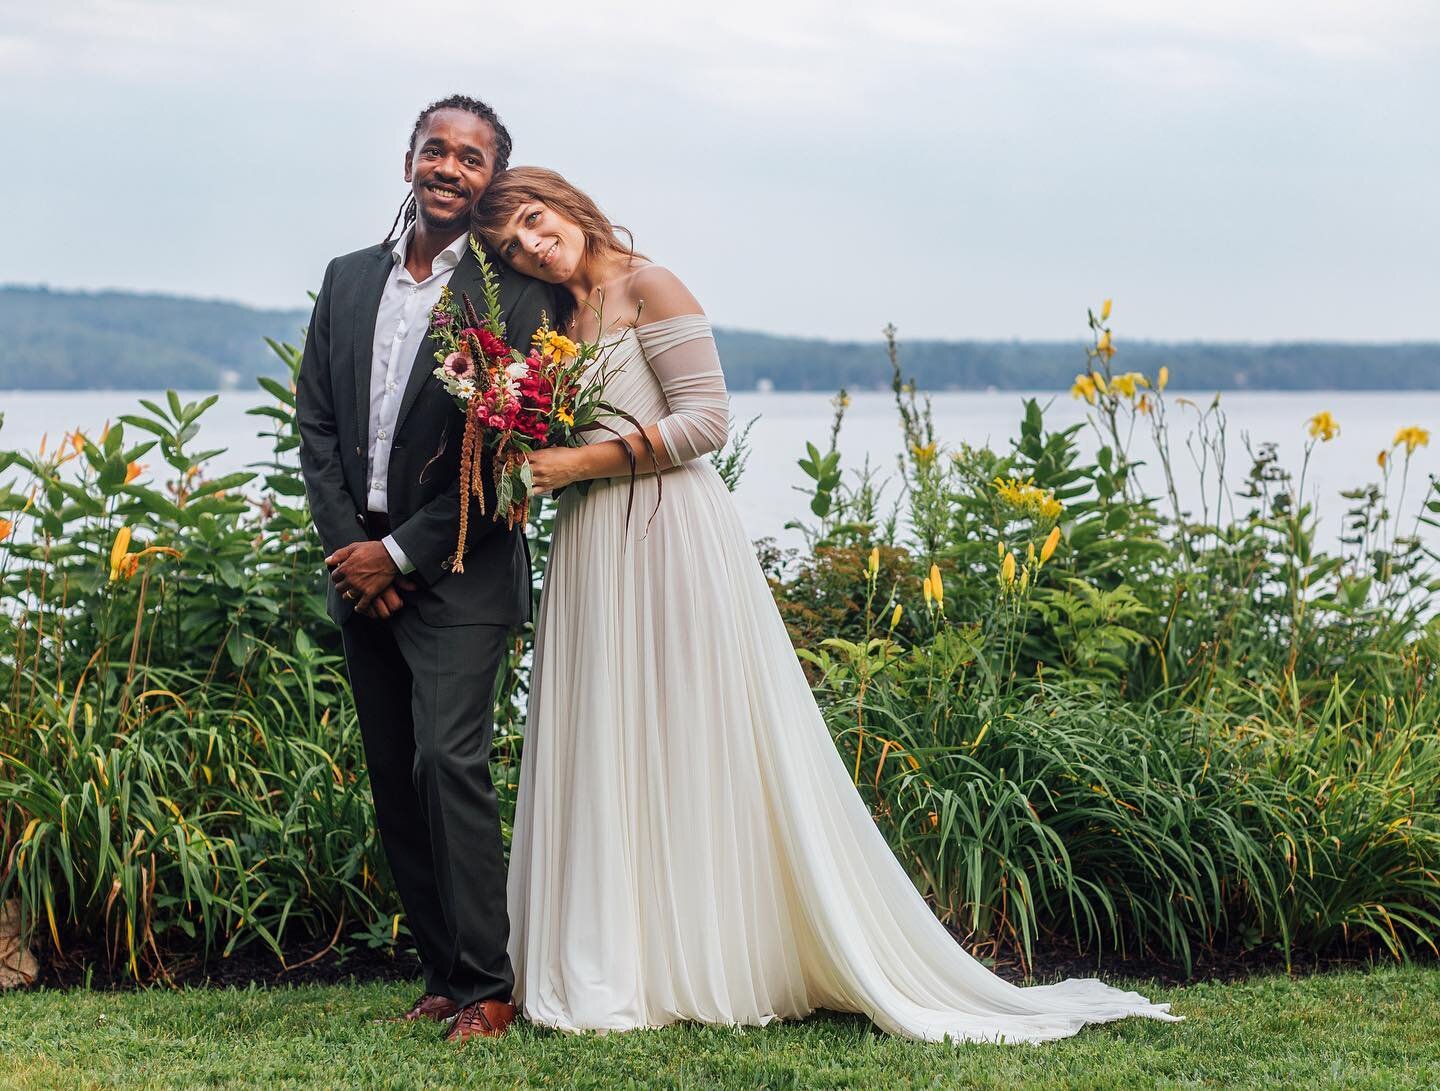 What a fun story to wake up to! Sami and Kaz&rsquo;s wedding was phenomenal, as is their story of how they got there, so phenomenal in fact, even the @nytimes thought so too! Check out @samistevens &amp; @kazemde love story in the @nytimes to read mo